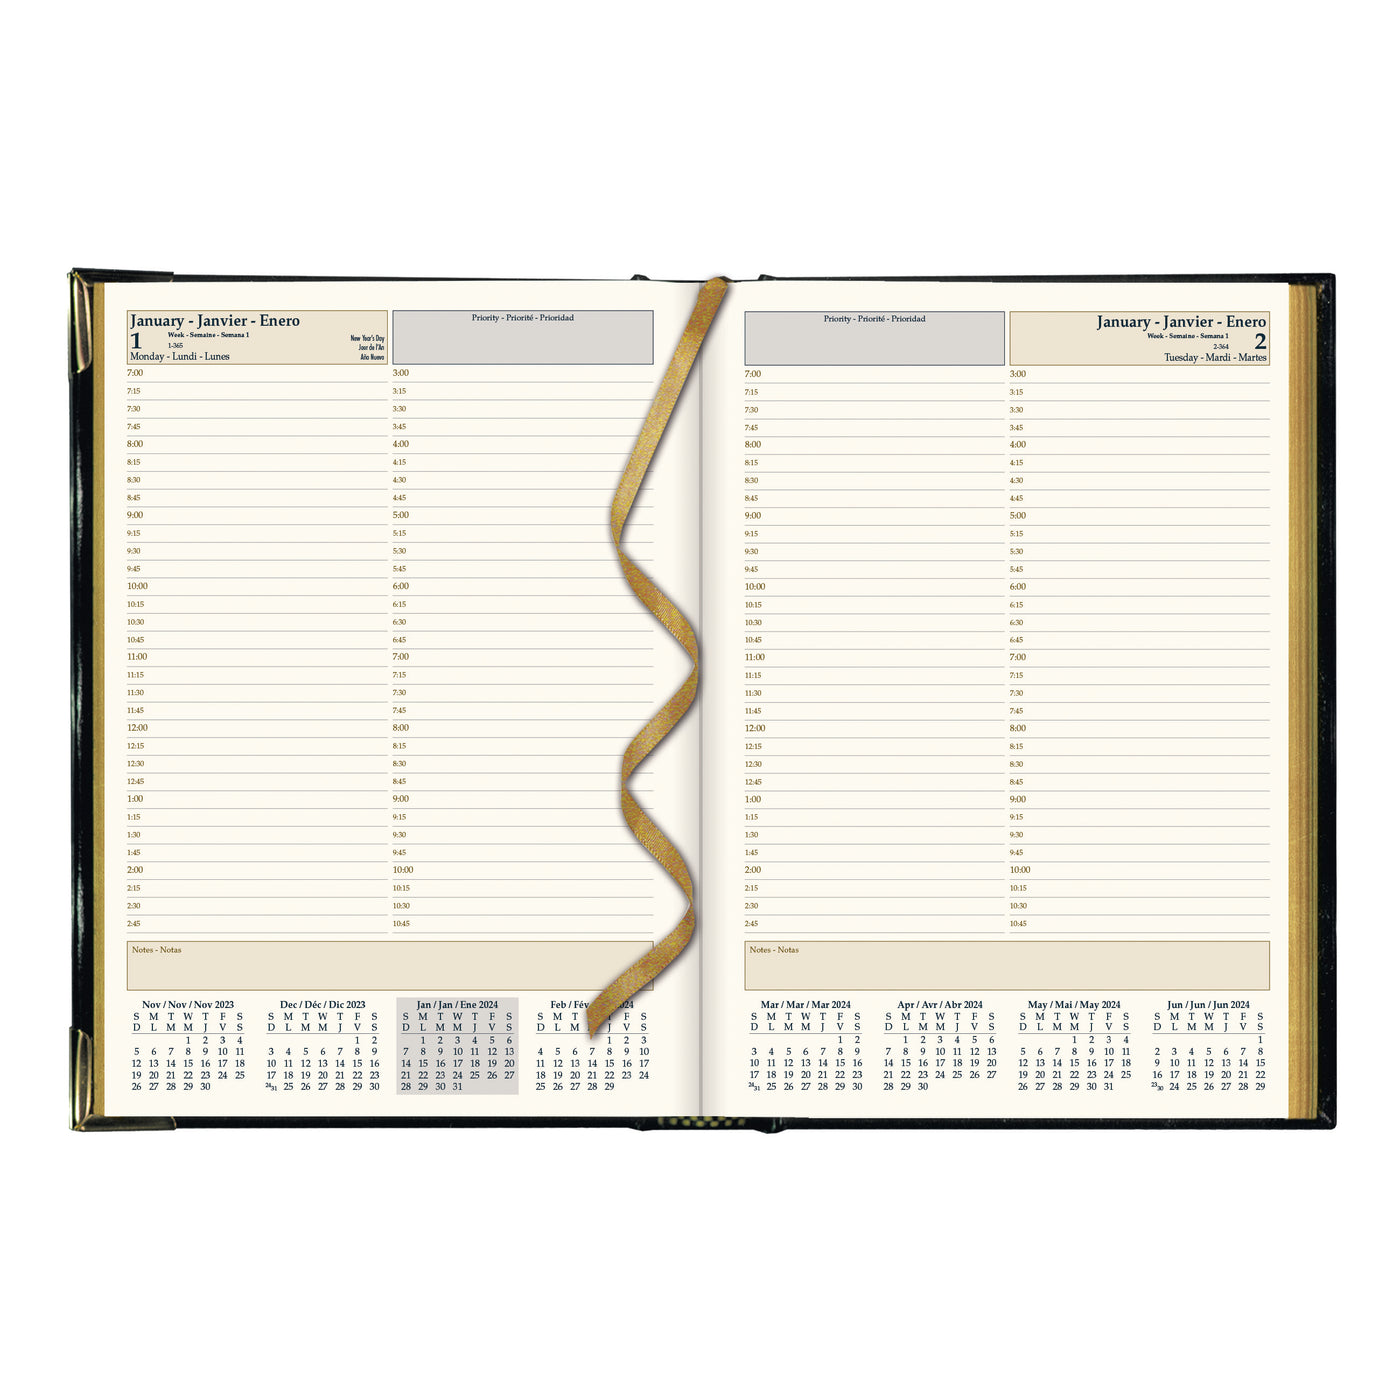 Brownline Executive Daily Planner - 7 3/4" x 10 3/4"